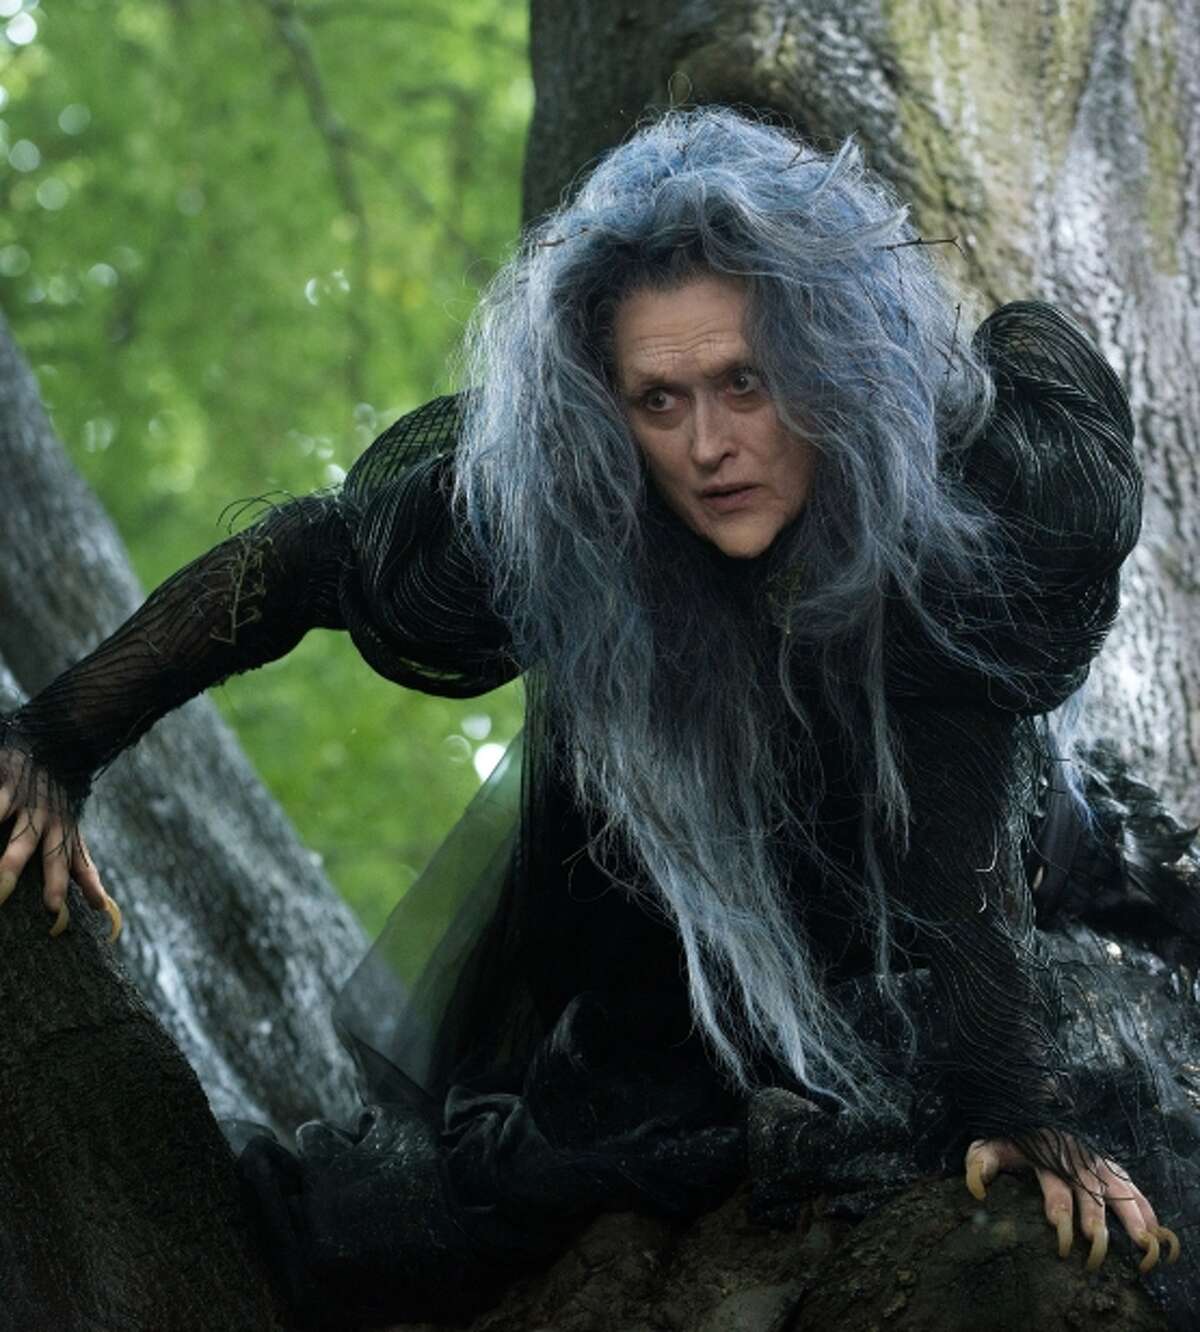 Meryl as the witch in the film “Into the Woods.”